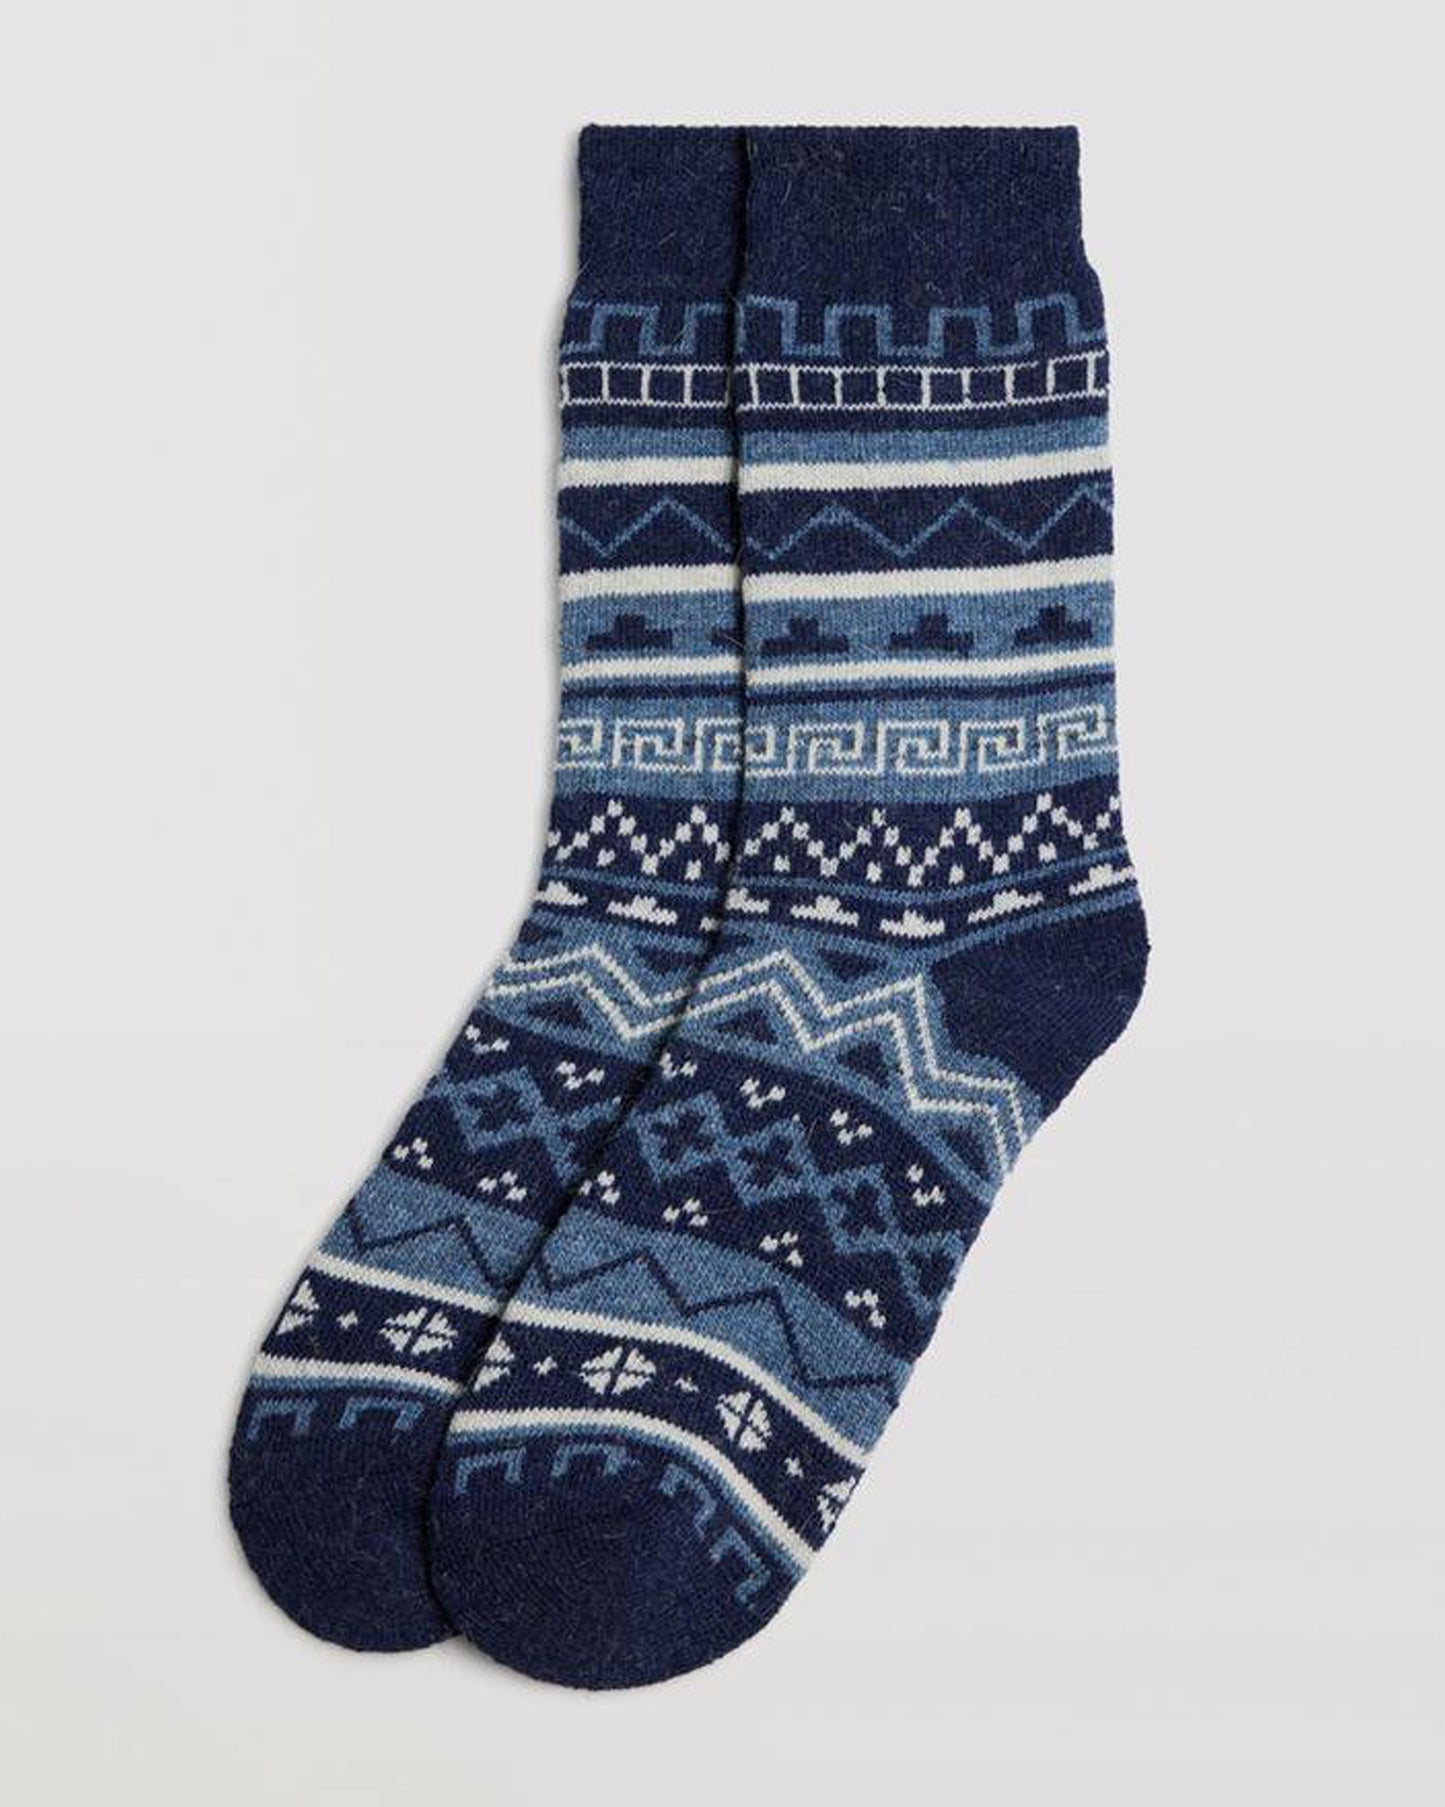 Ysabel Mora 12888 Aztec Socks - Navy blue warm wool and angora mix thermal socks with an Aztec style pattern in shades of pale and light blue.